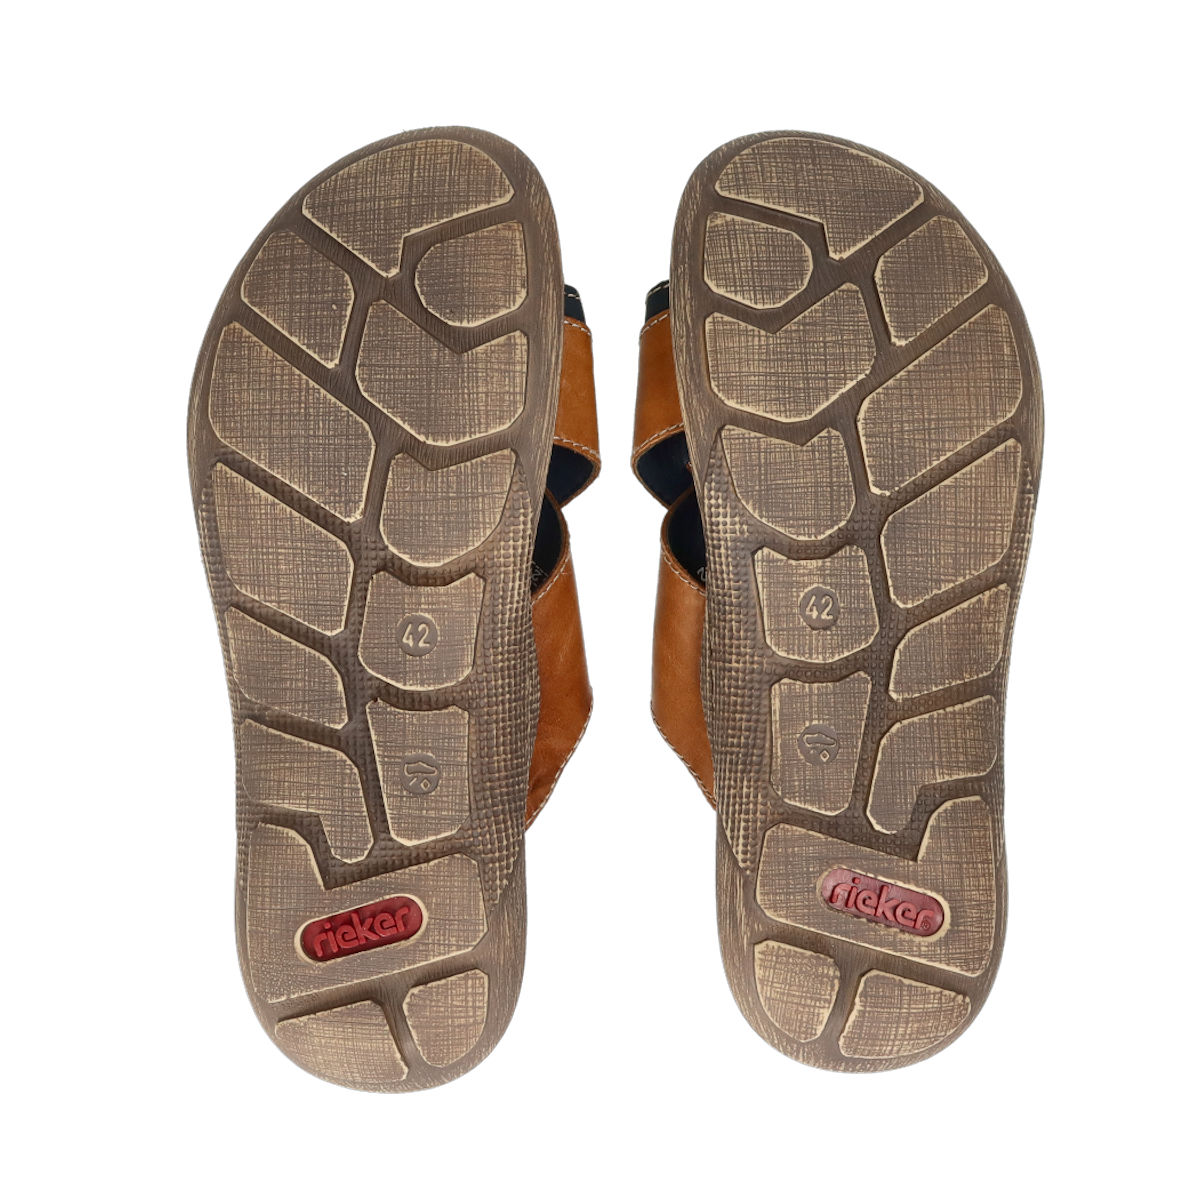 Rieker leather slippers - brown | Robel.shoes